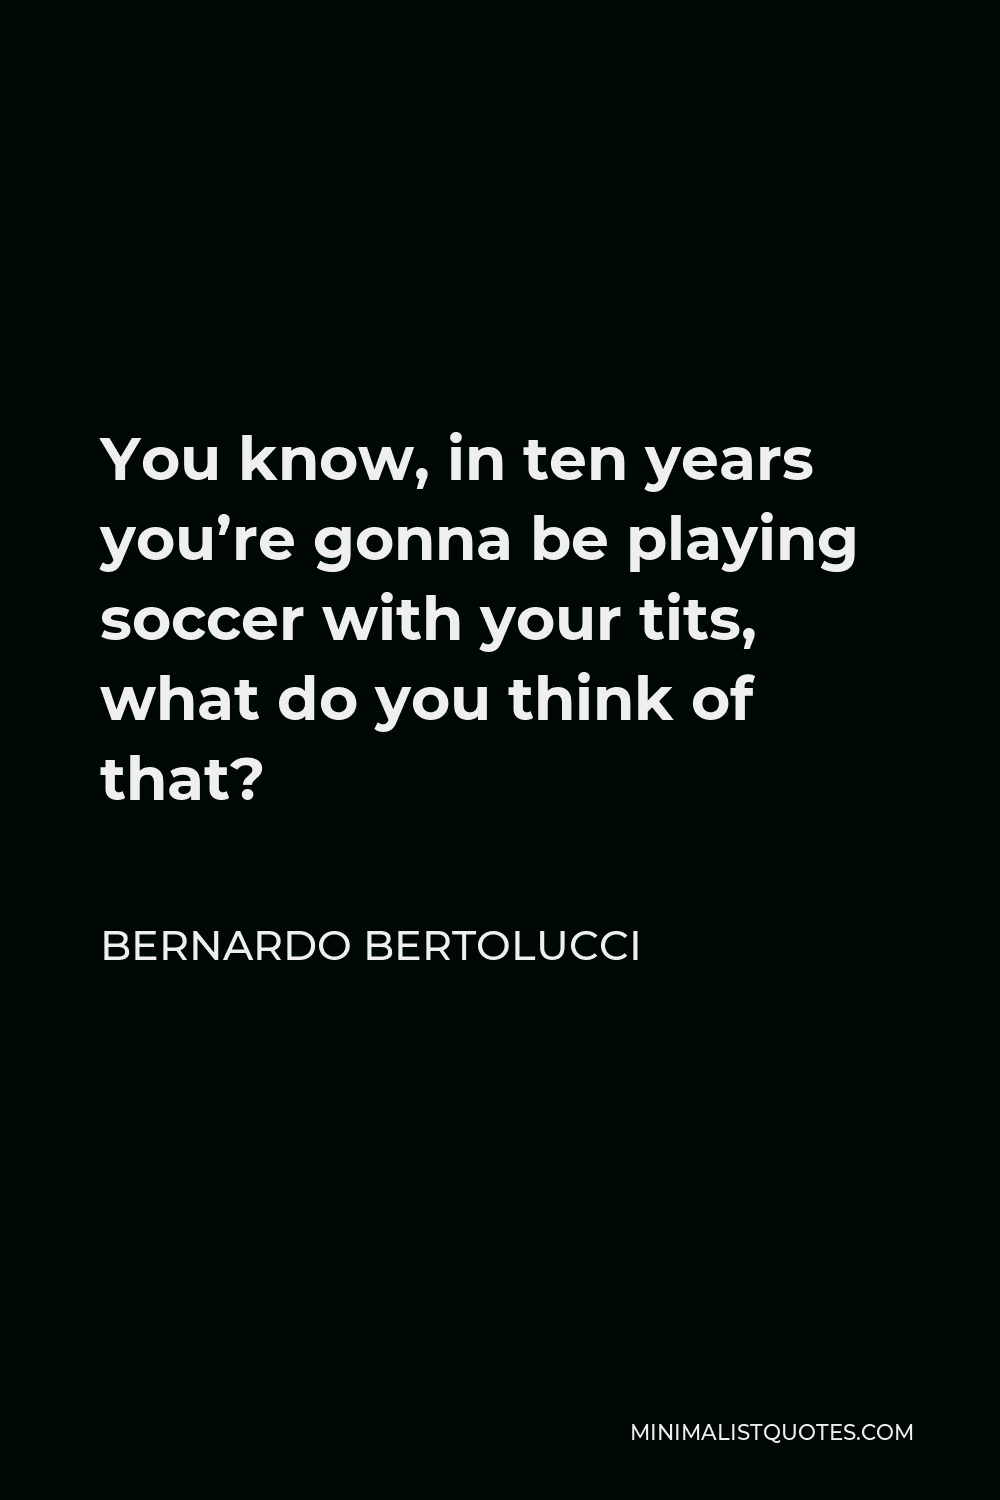 Bernardo Bertolucci Quote - You know, in ten years you’re gonna be playing soccer with your tits, what do you think of that?